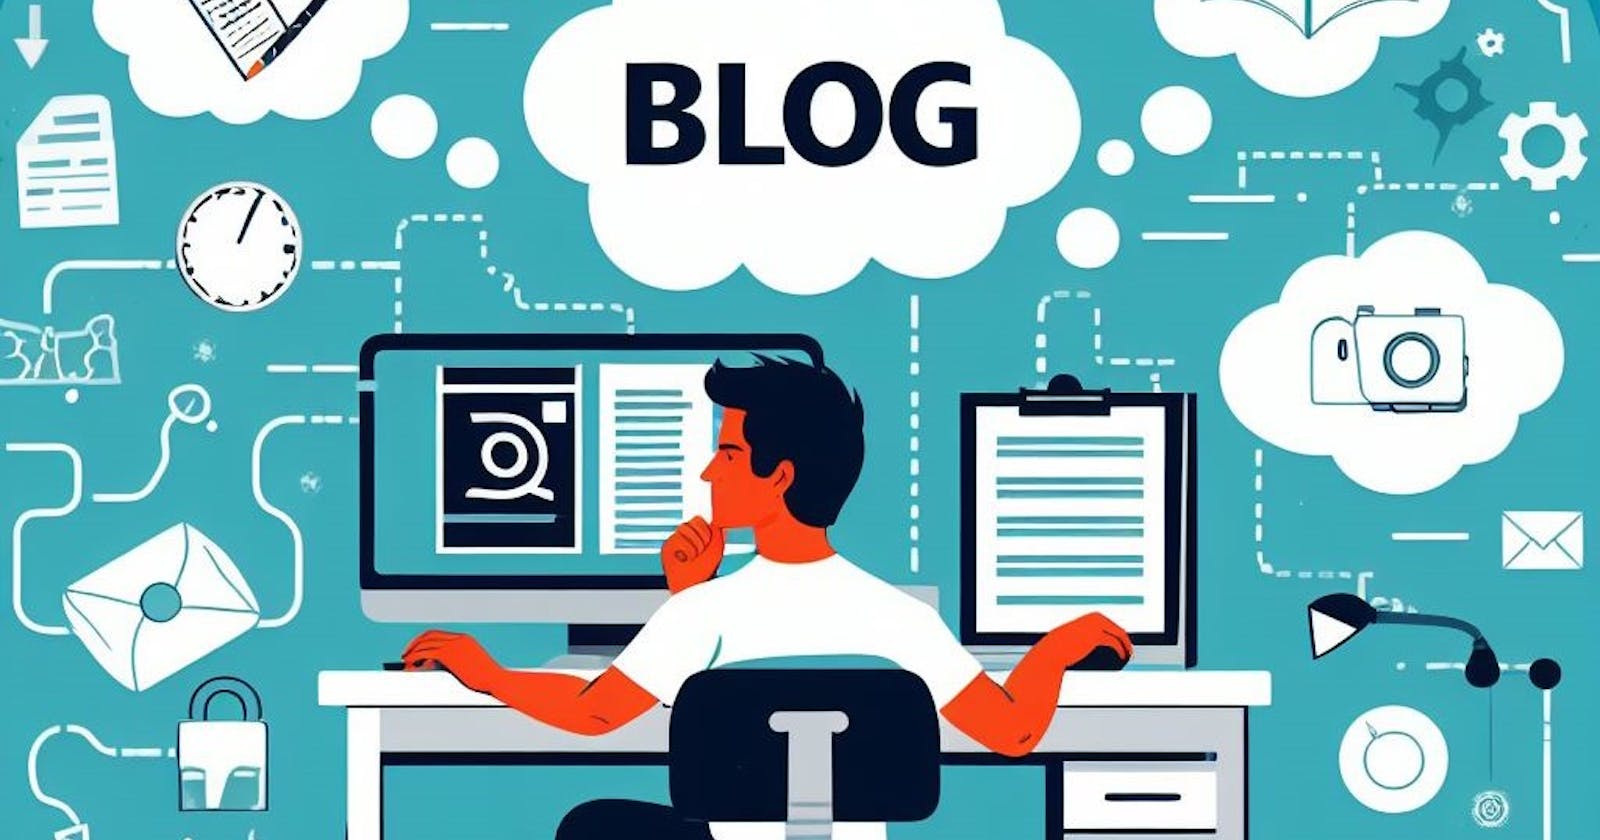 Why the Hell! should I Blog?